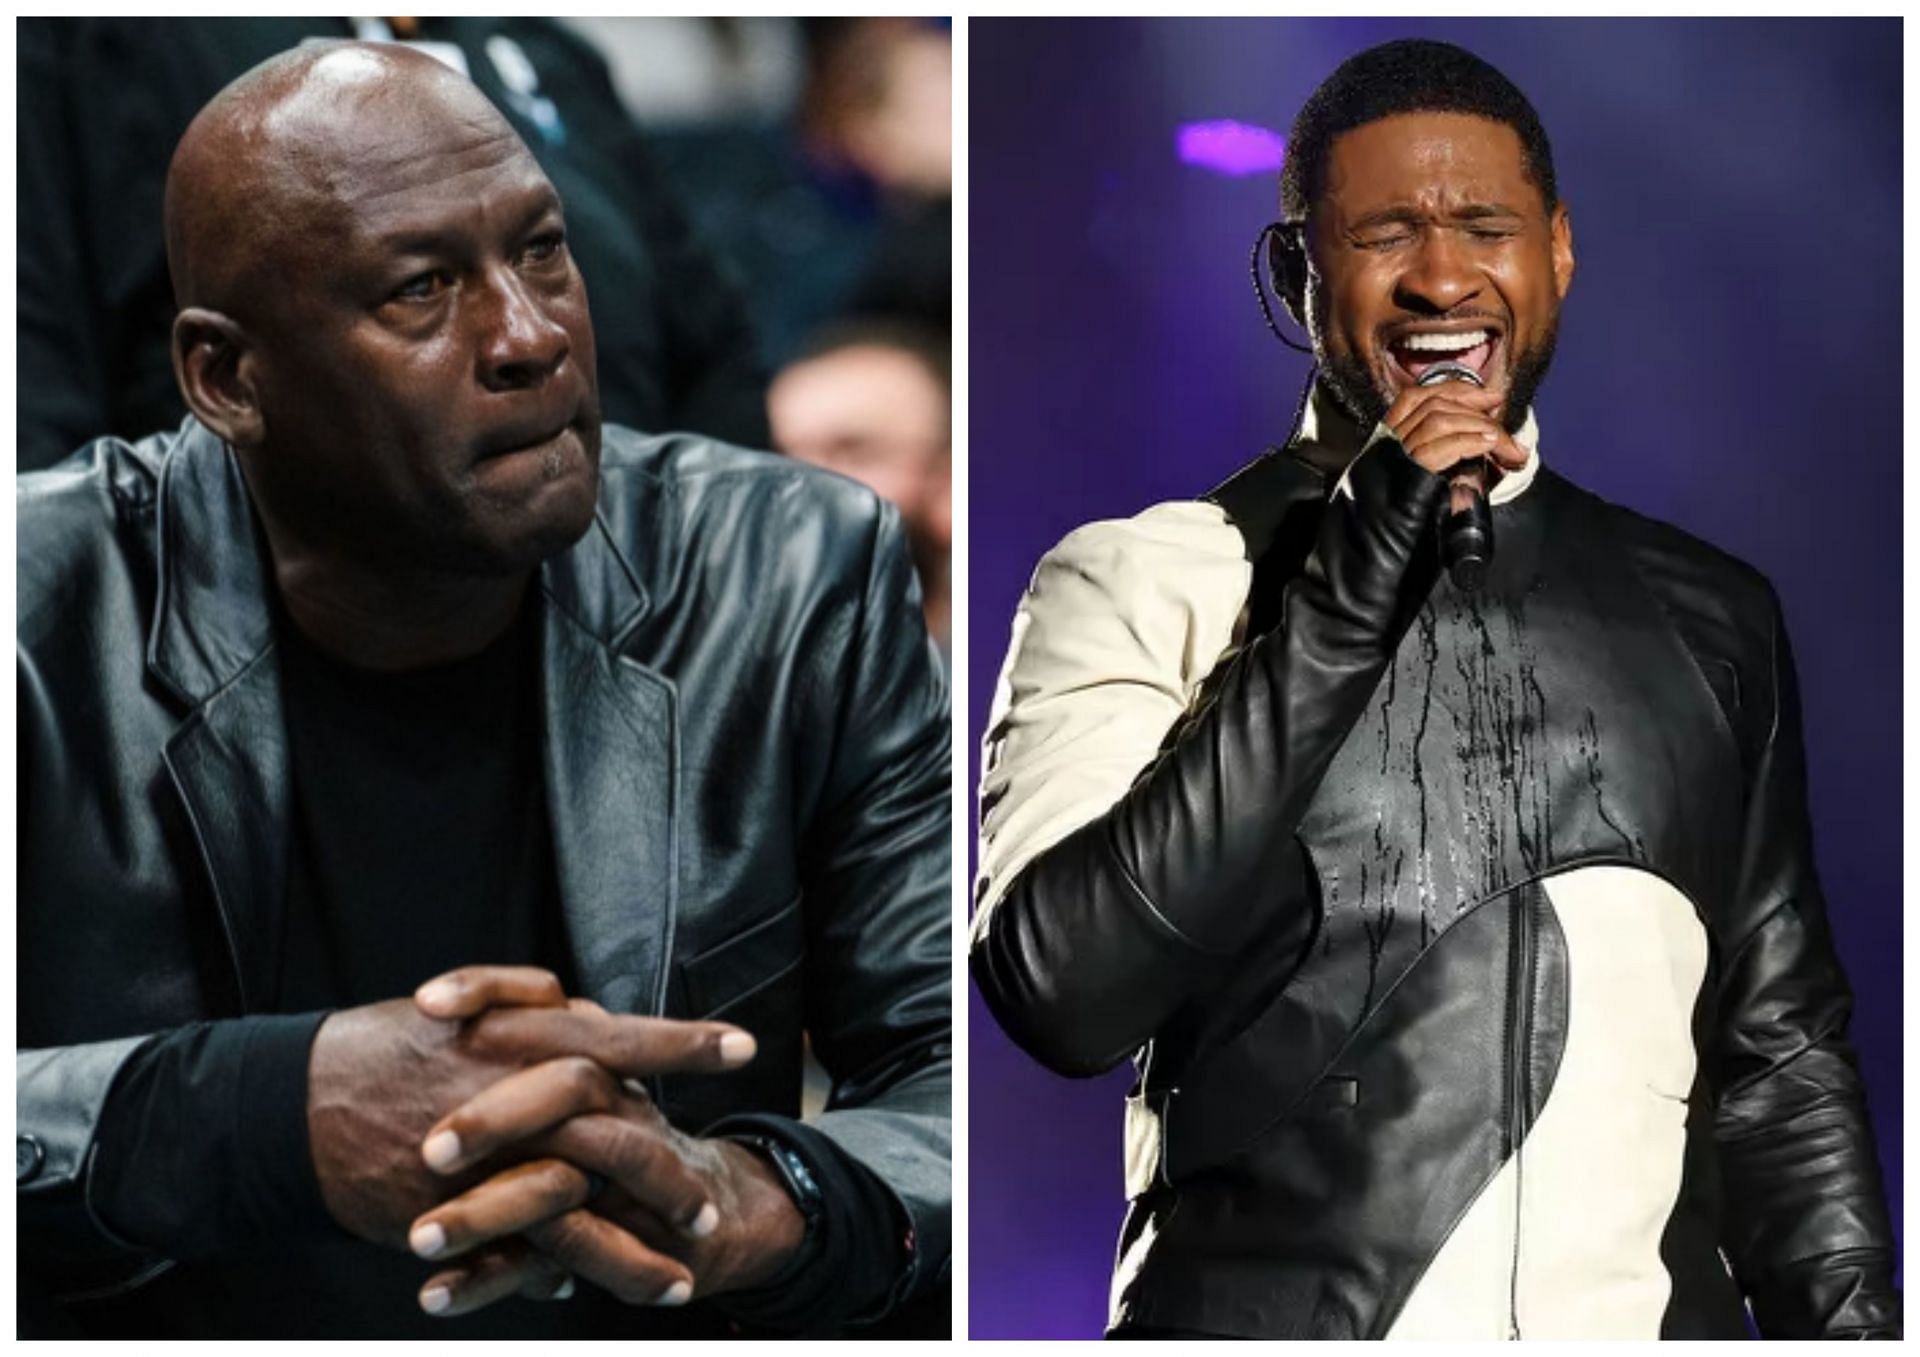 NBA Hall of Famer Michael Jordan and famous singer have been longtime friends